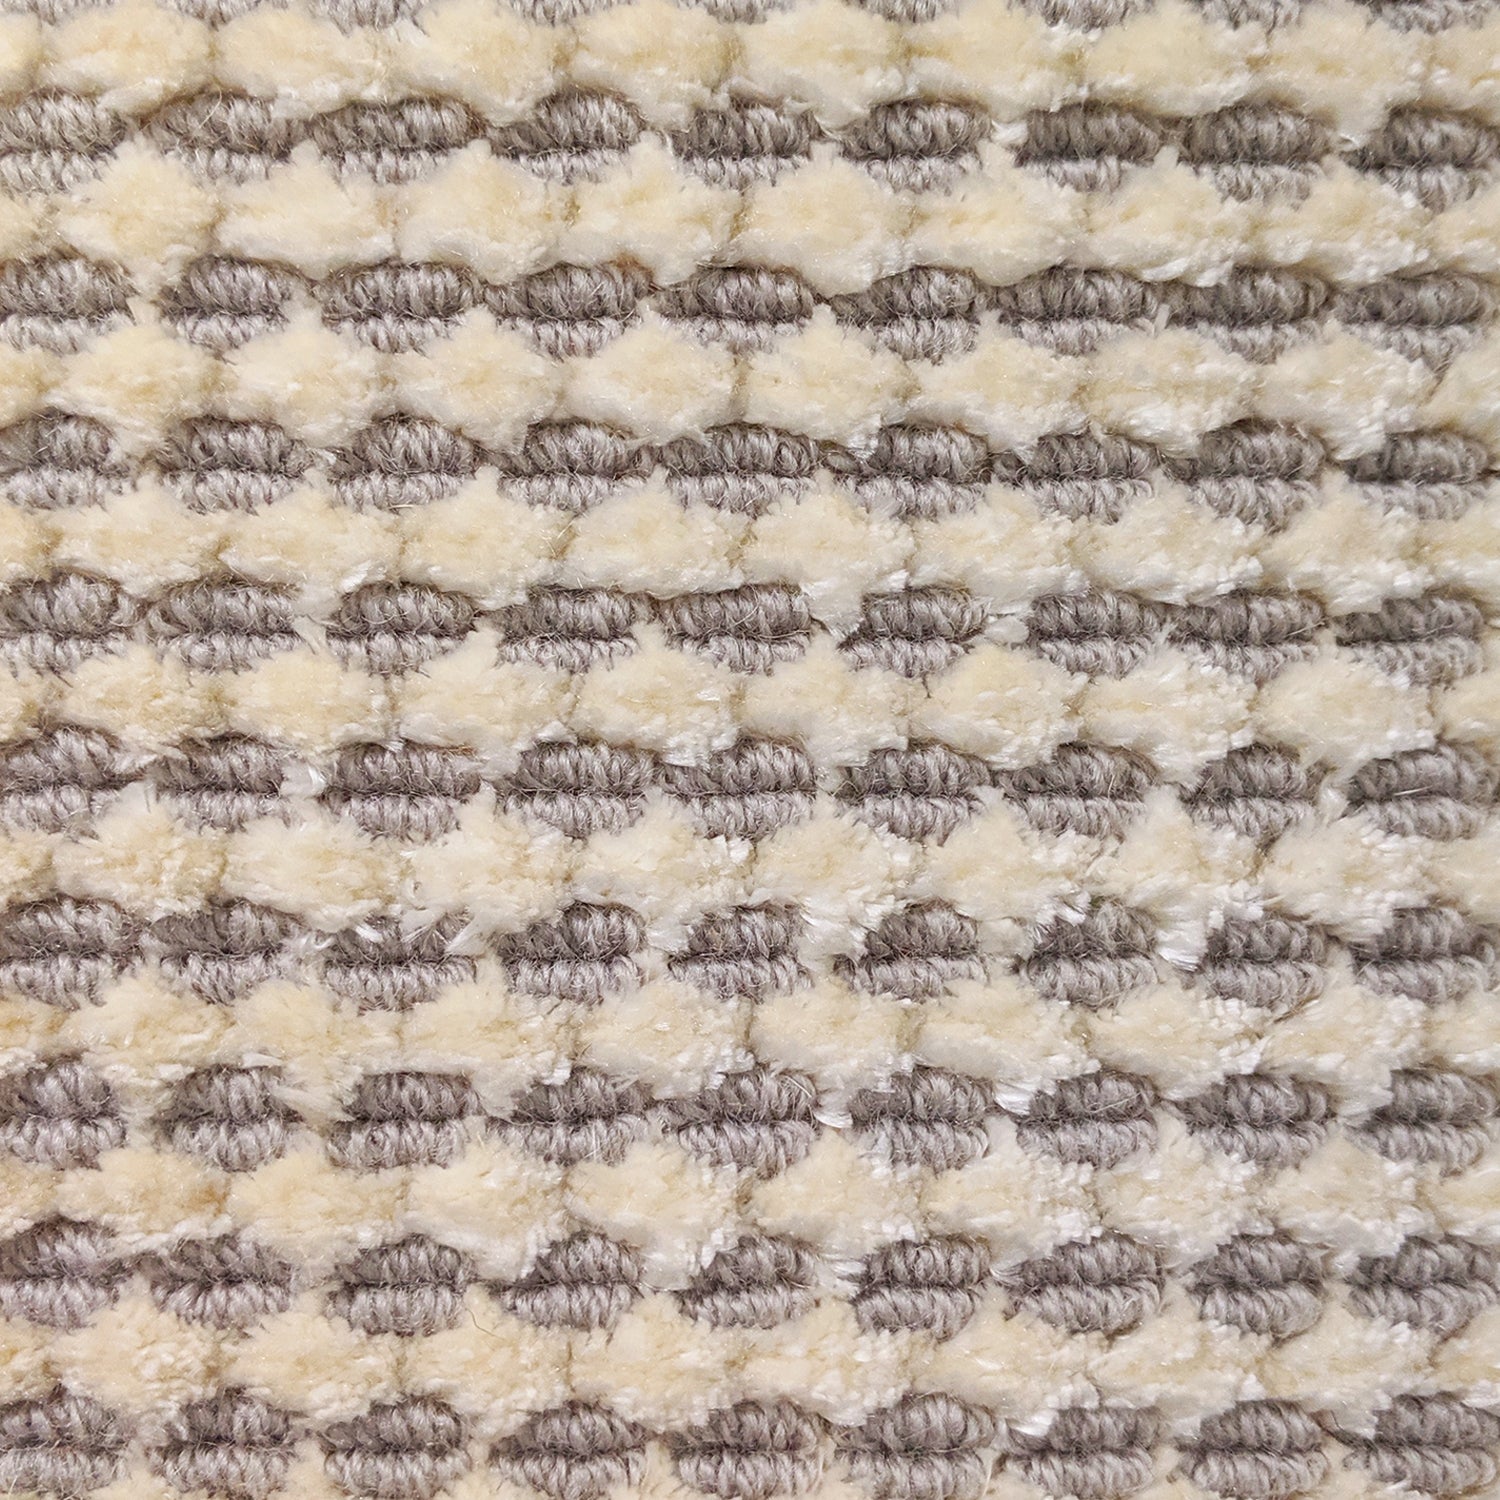 Wool-silk broadloom carpet swatch in a dimensional flat-and-tufted grid weave in cream and steel grey.